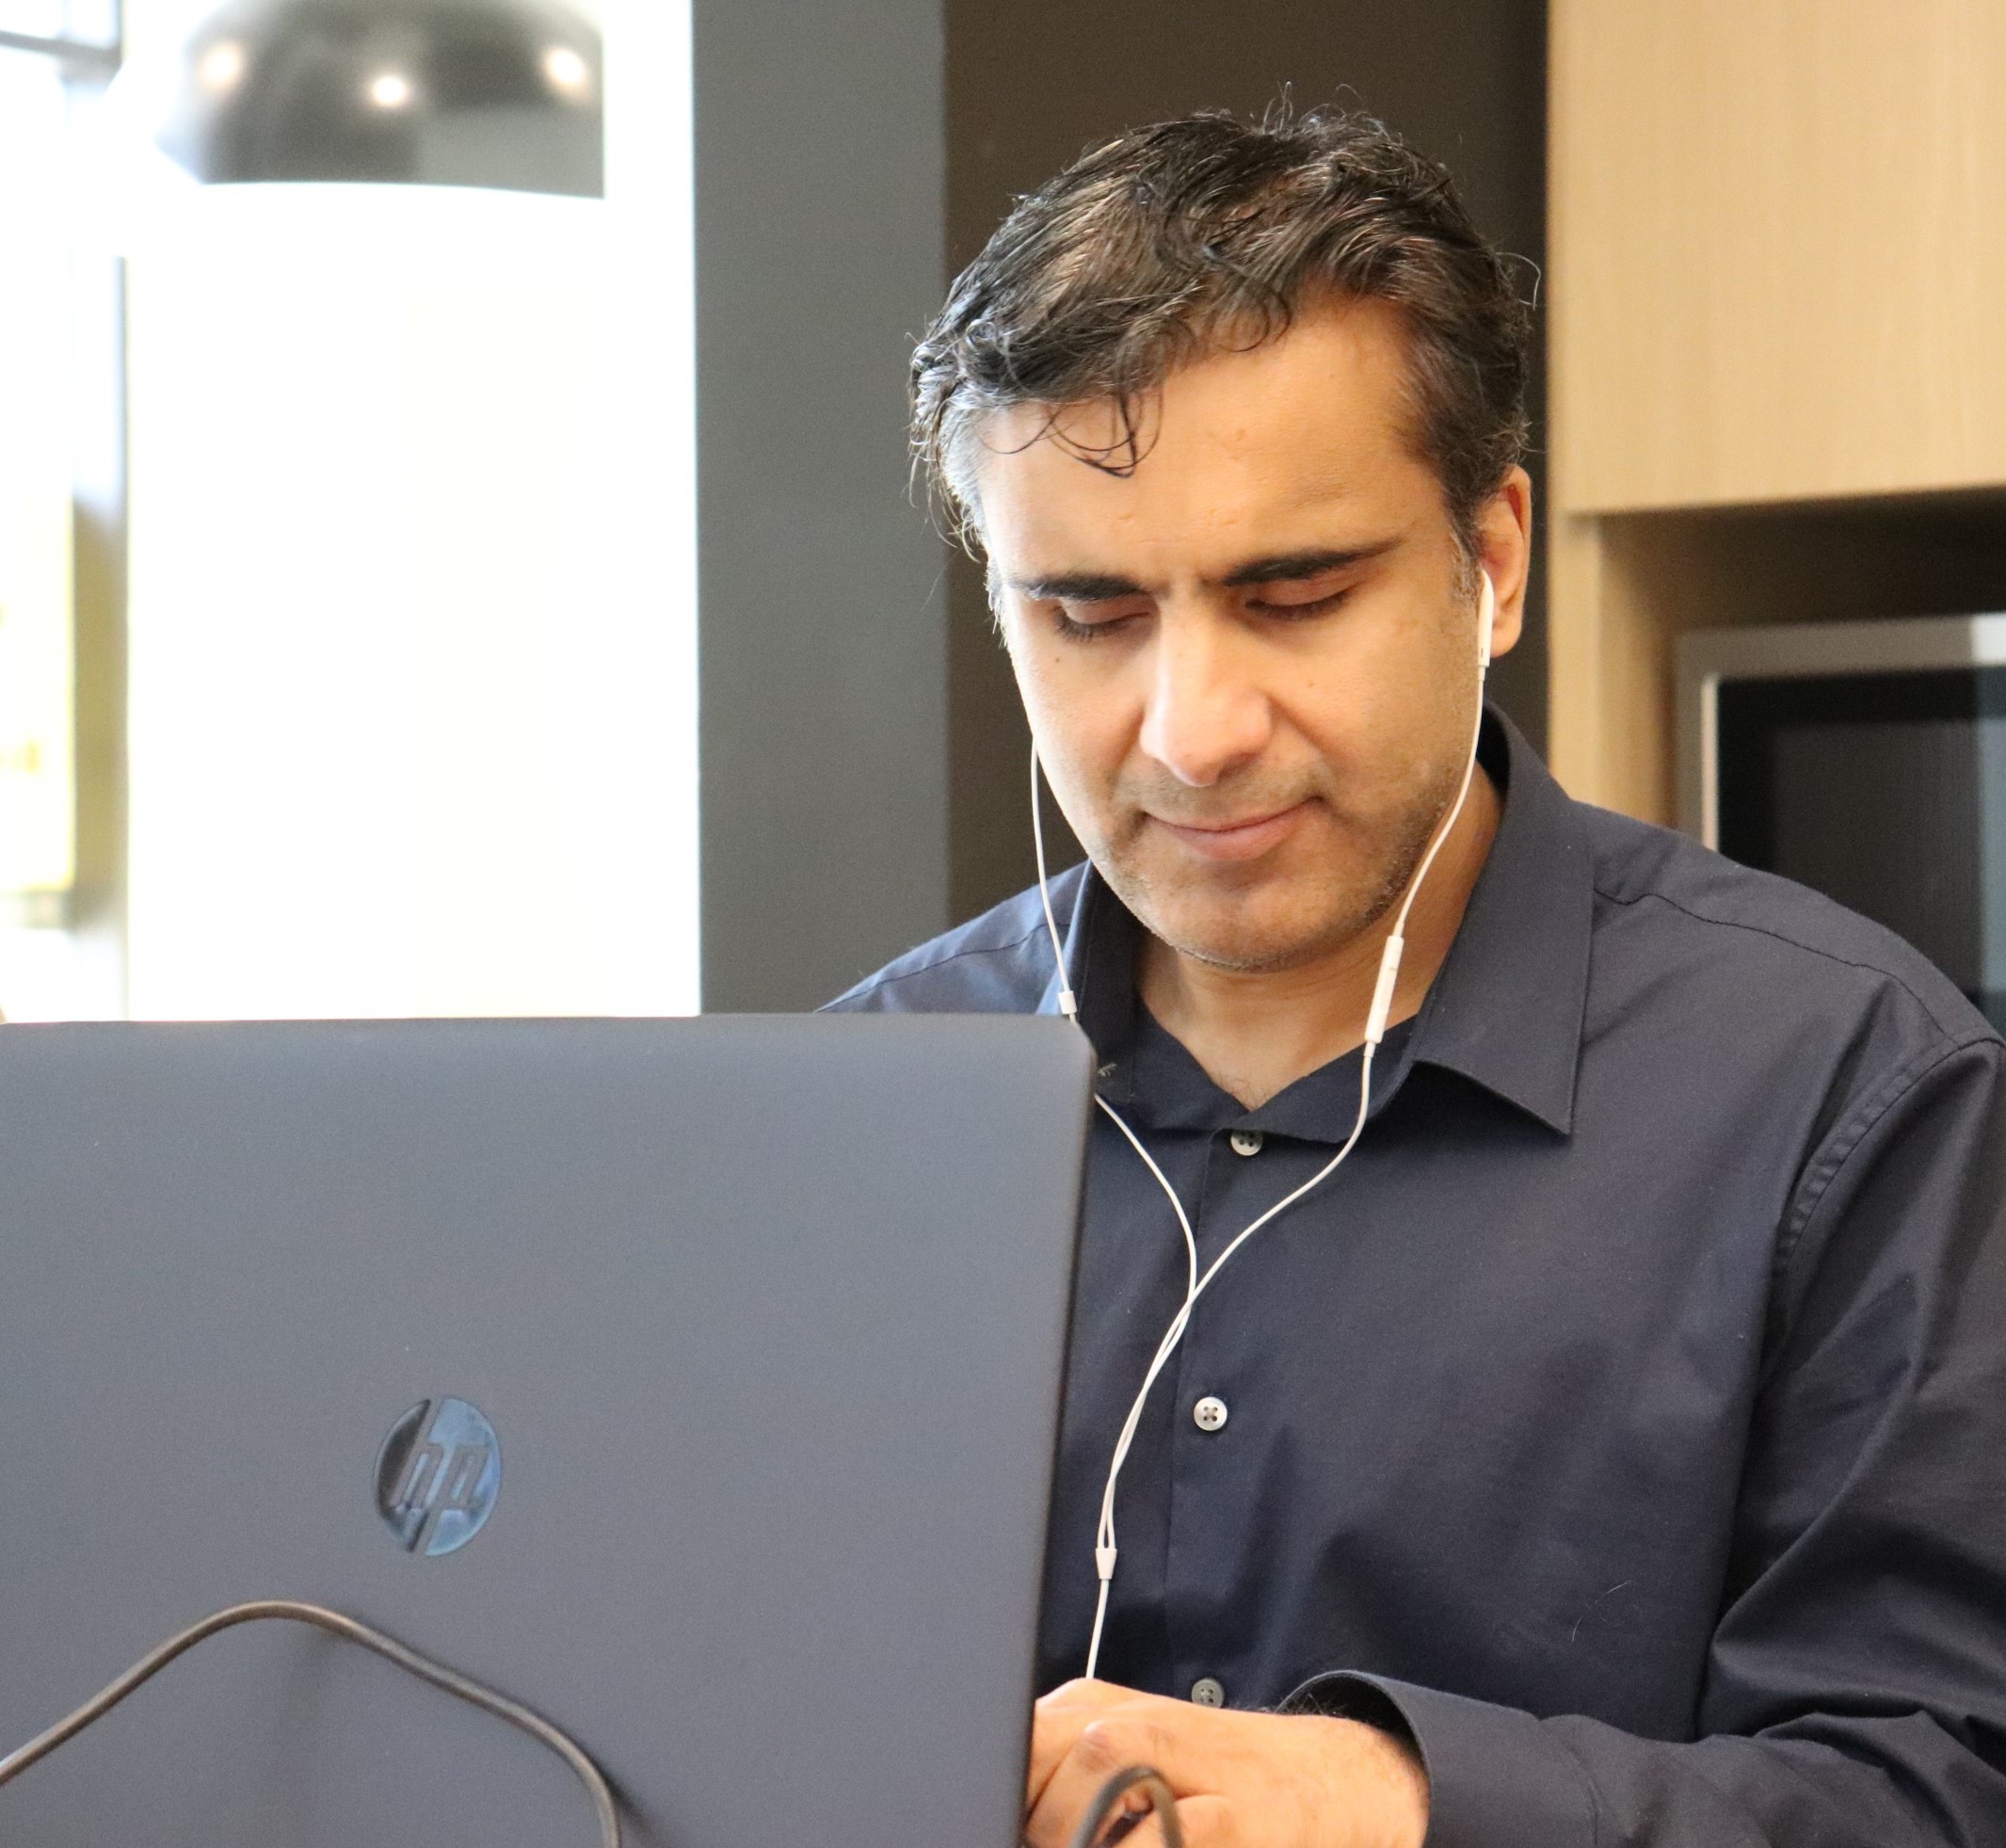 A man with a navy blue shirt is typing on a computer. He has earphones in his ears.